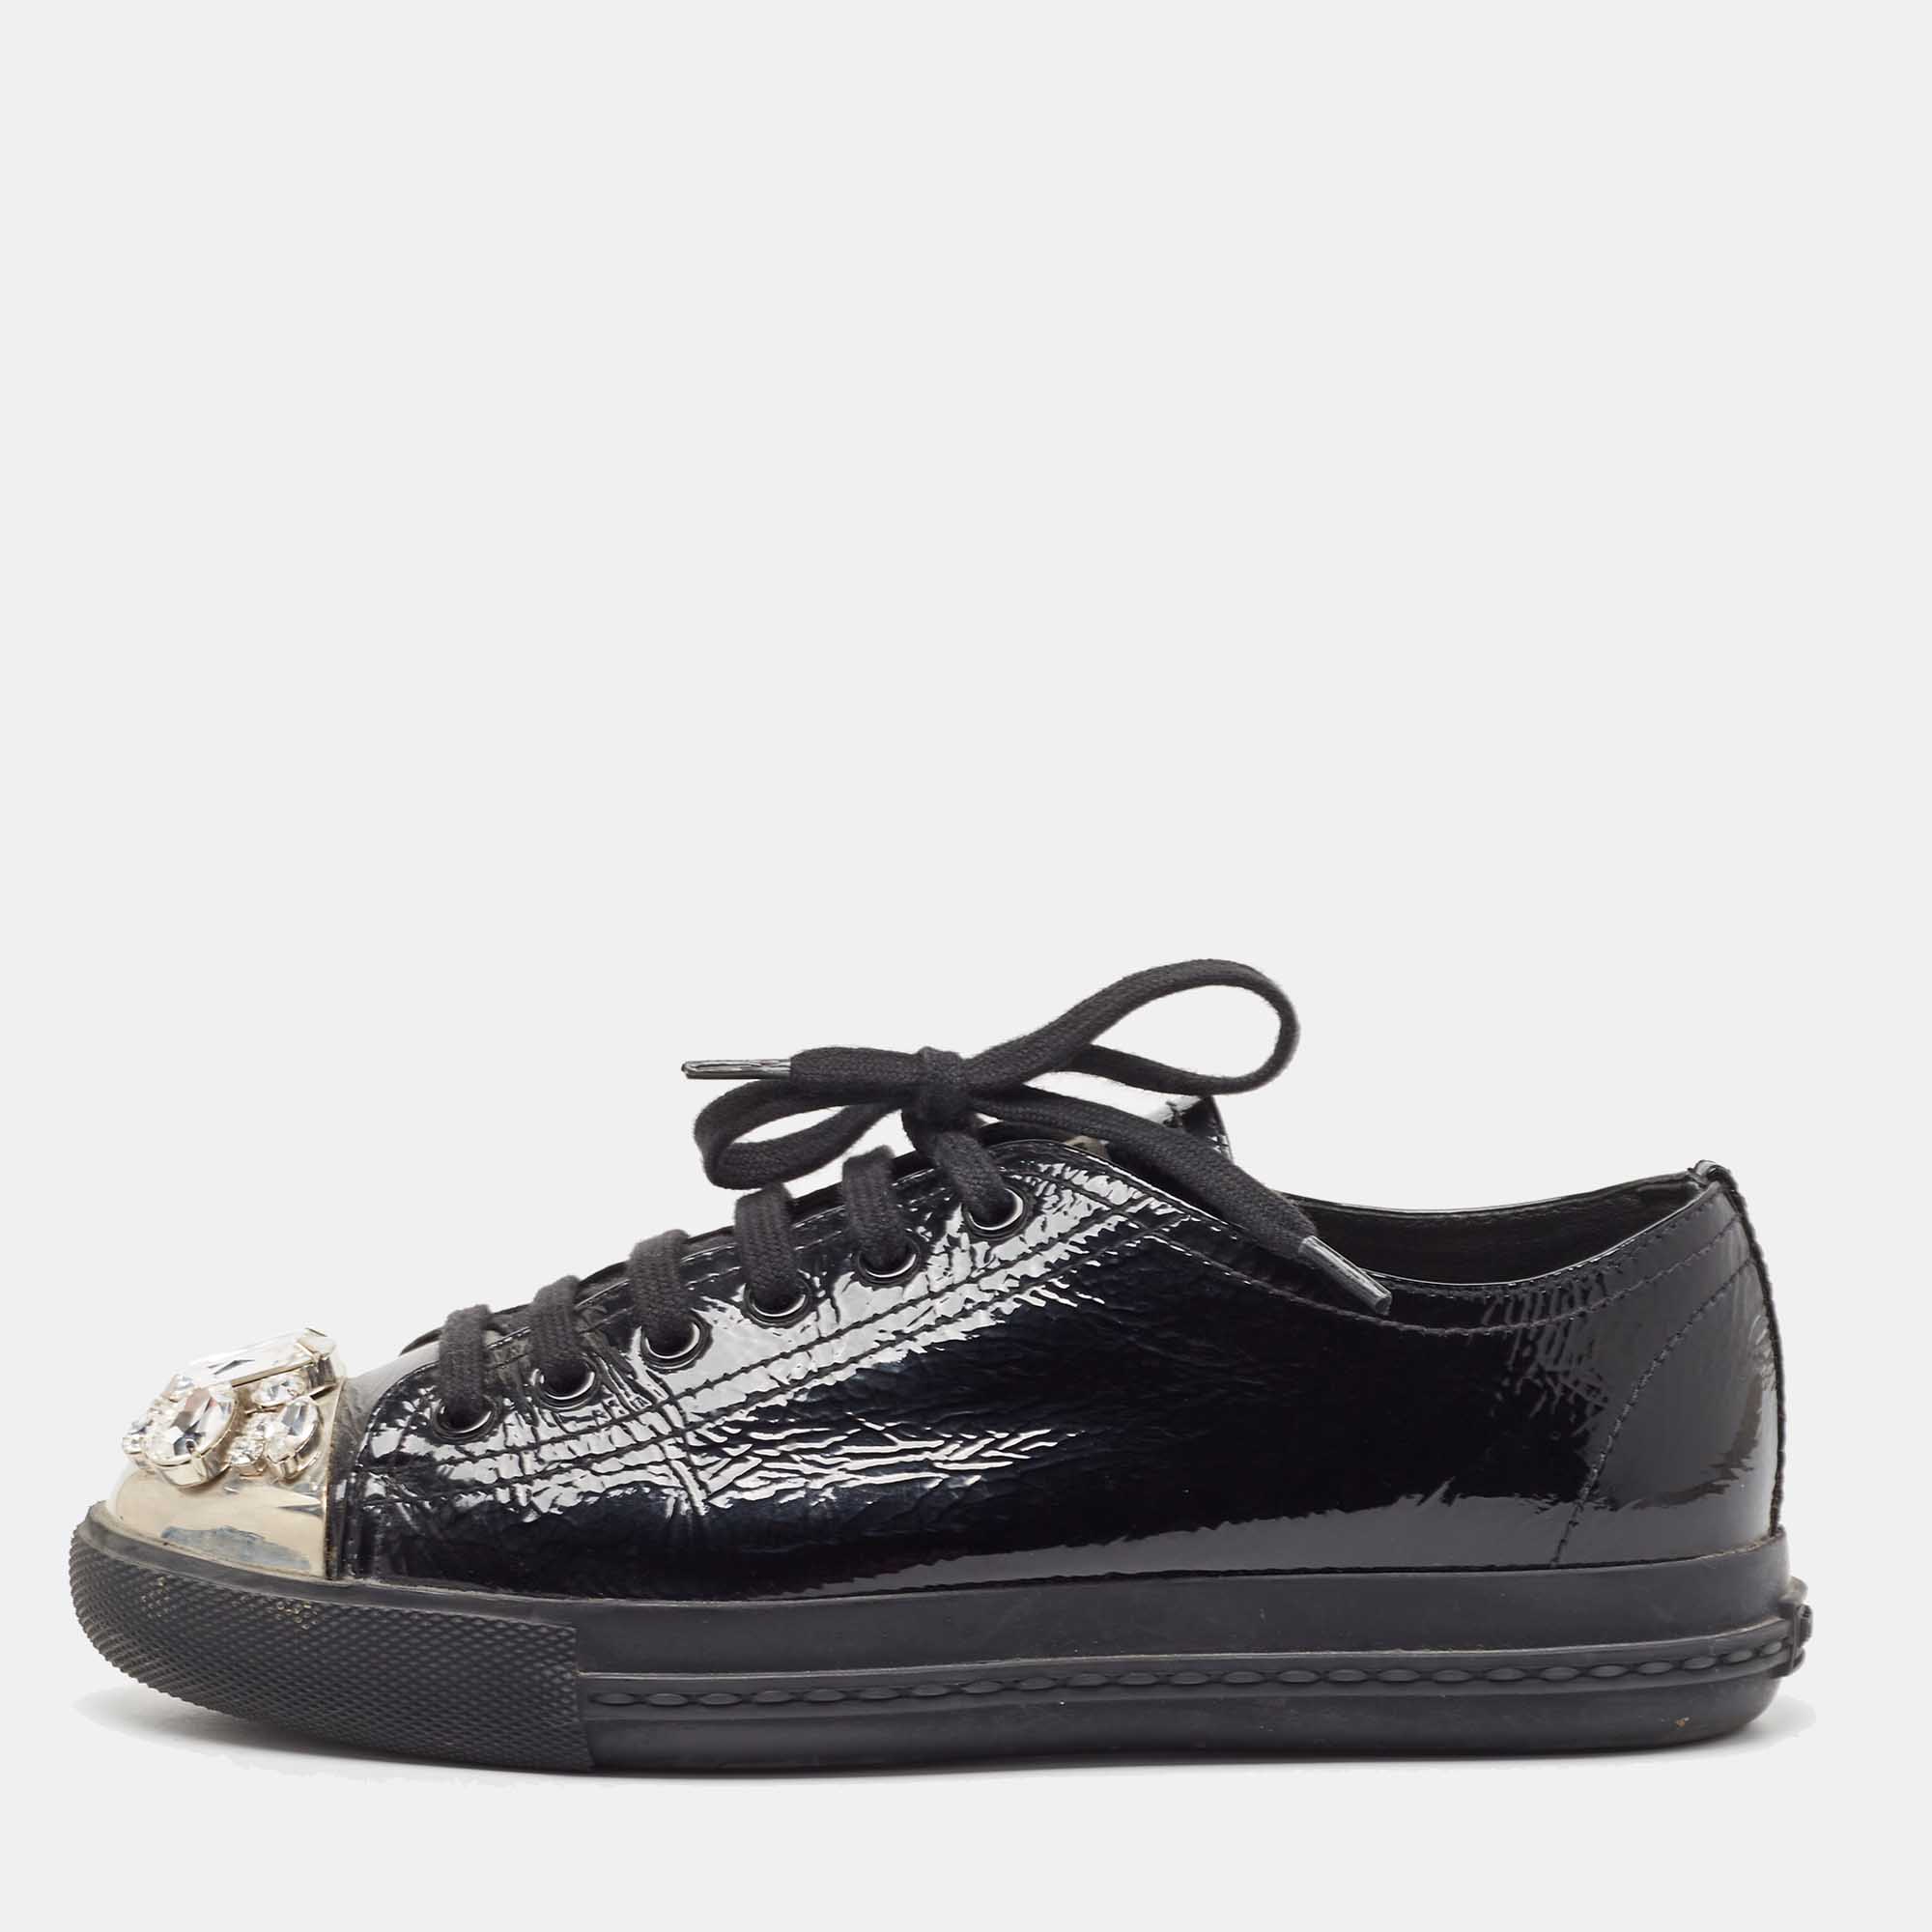 

Miu Miu Black Patent Leather Crystal Studded Sneakers Size